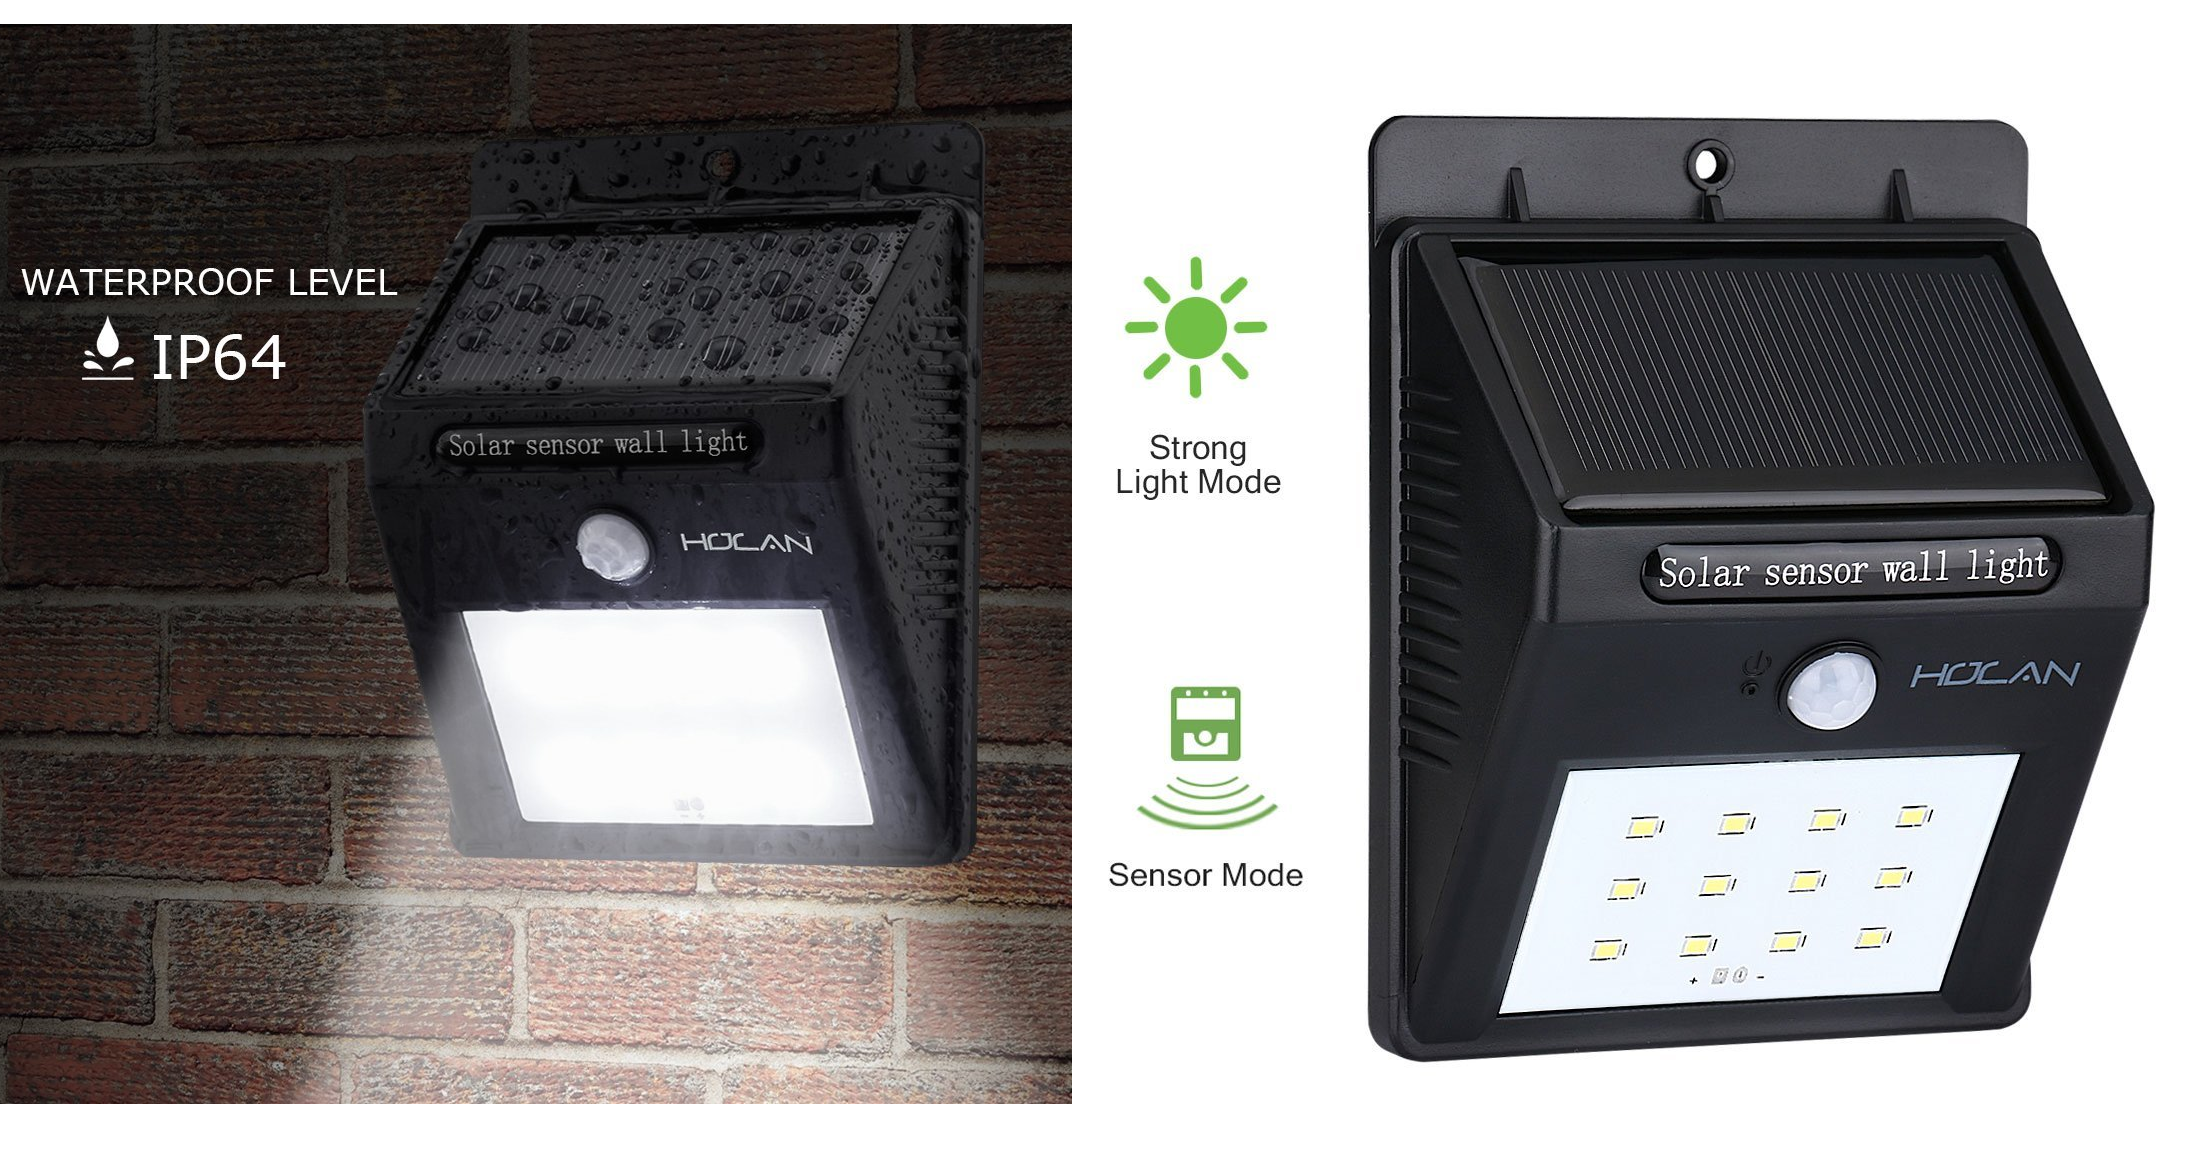 Solar Motion Sensor Light, Holan 12 LED Rainproof Powered Security Light with 2 Intelligent Modes Only $6.99 on Amazon! (#1 Best Seller & Highly Rated!)